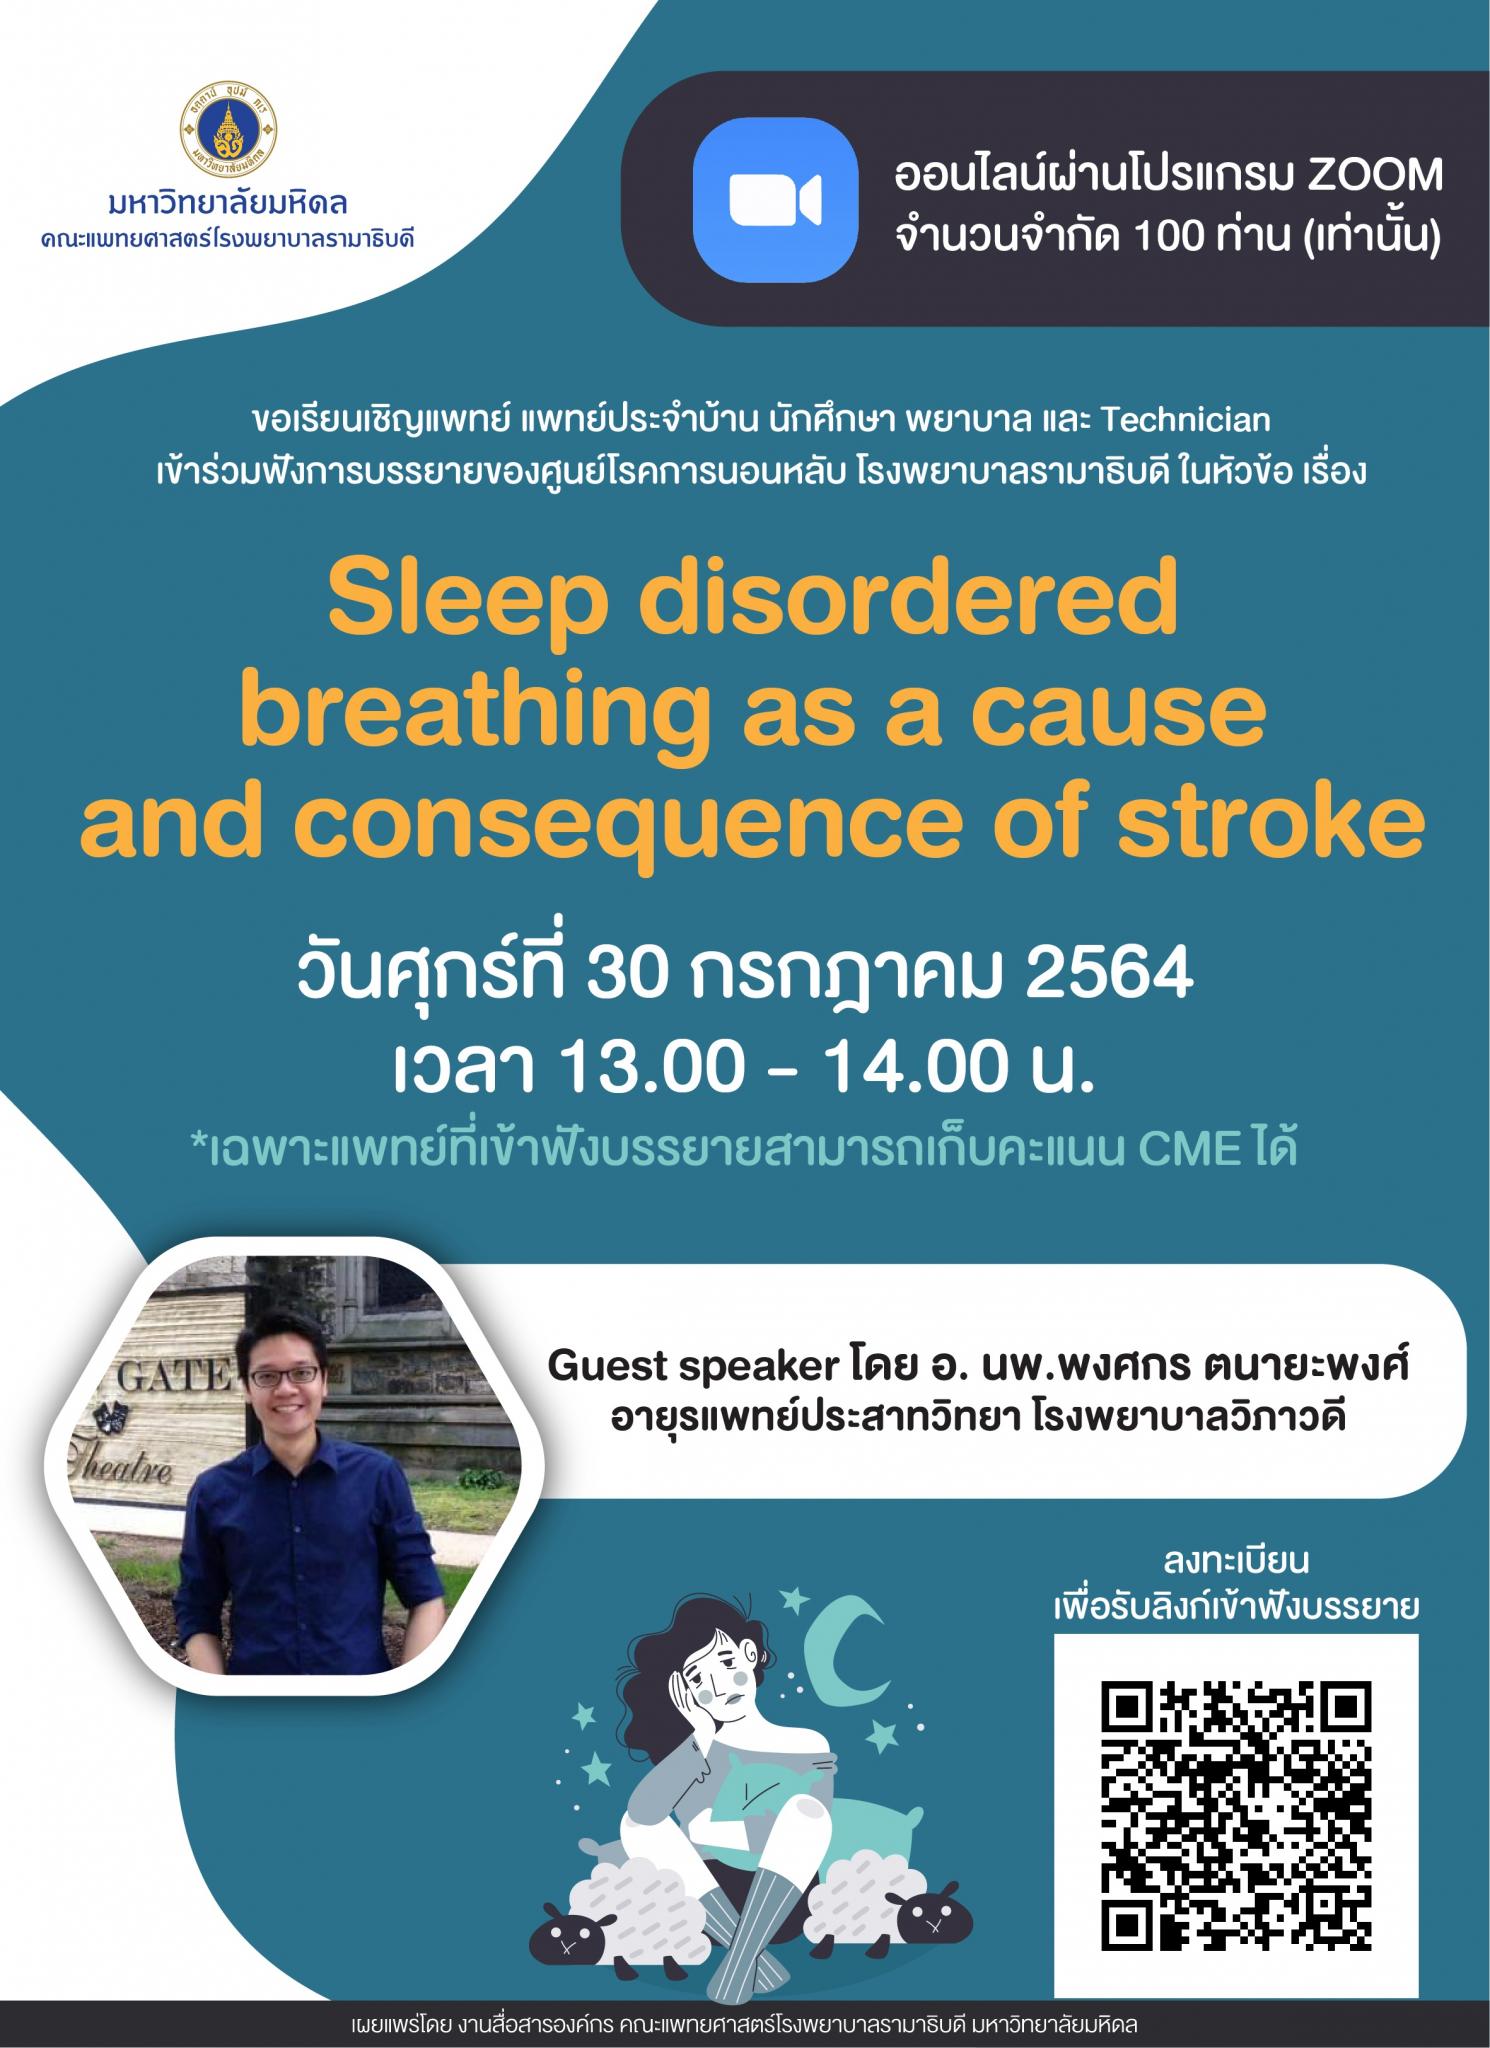 Sleep disordered breathing as a cause and consequence of stroke